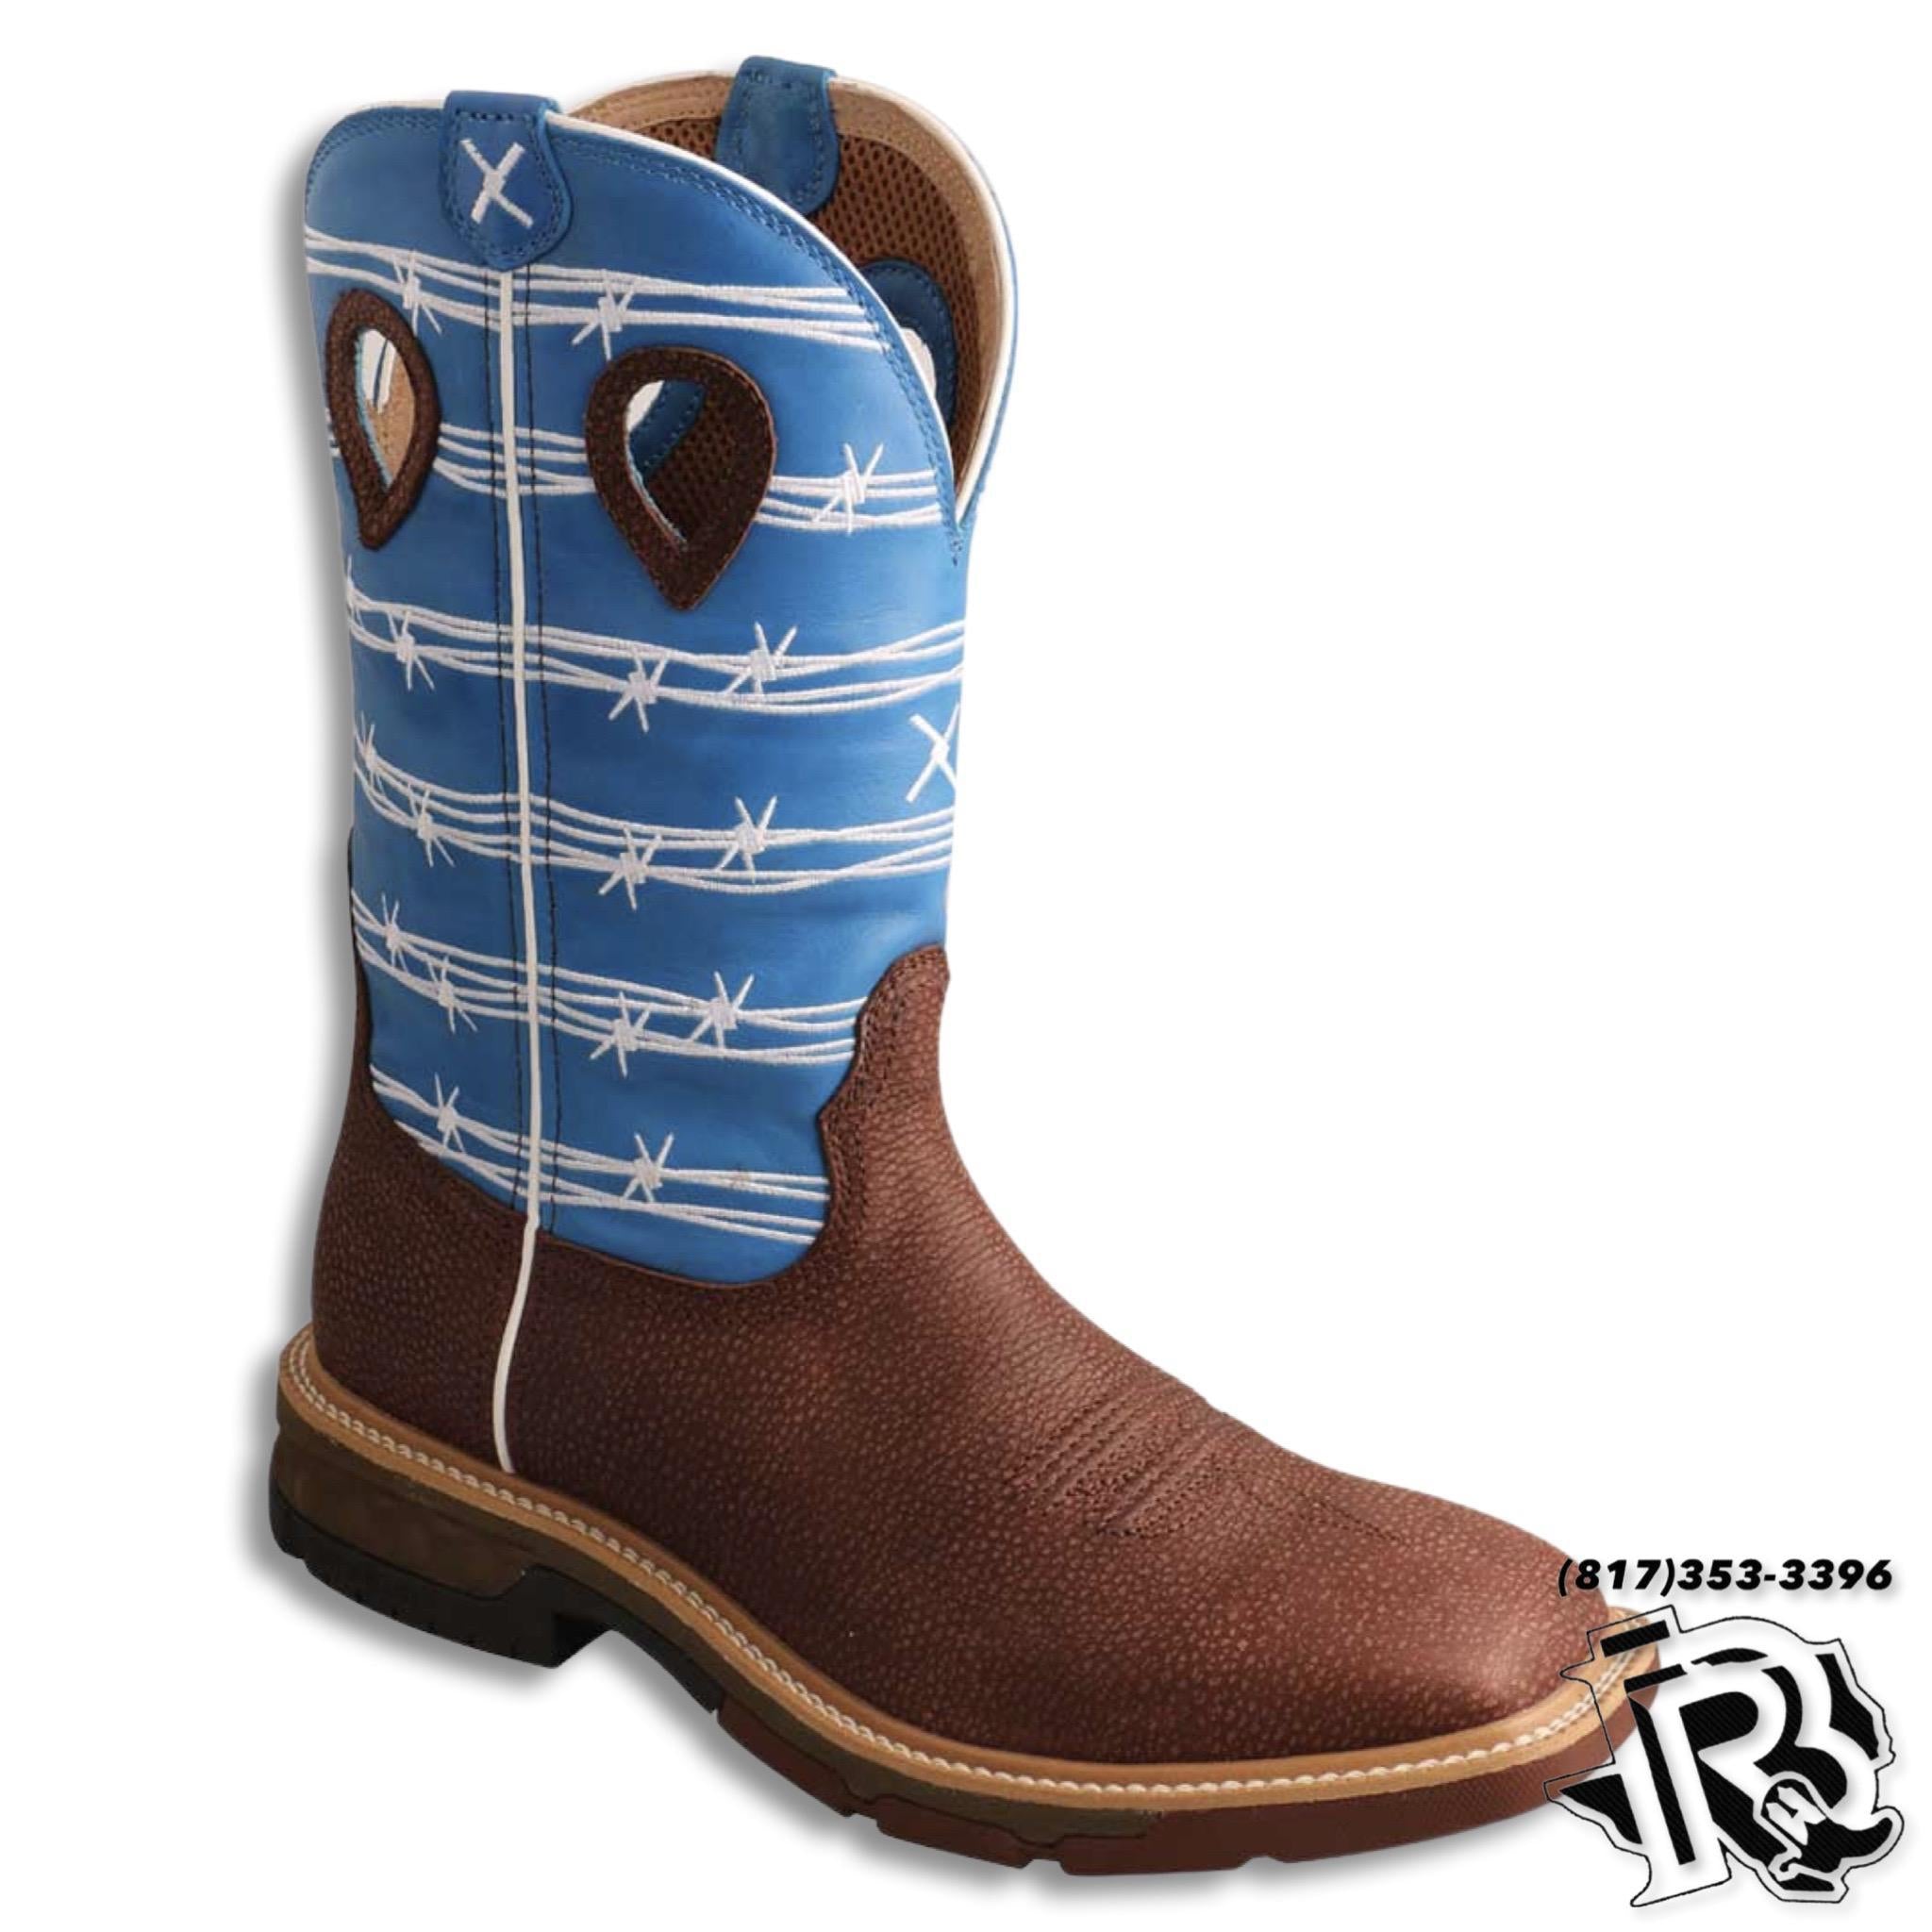 TWISTED X ALLOY (SAFETY) TOE | Rust Brown Barbwire Embroidery CellStretch Work Western Boot MXBA001